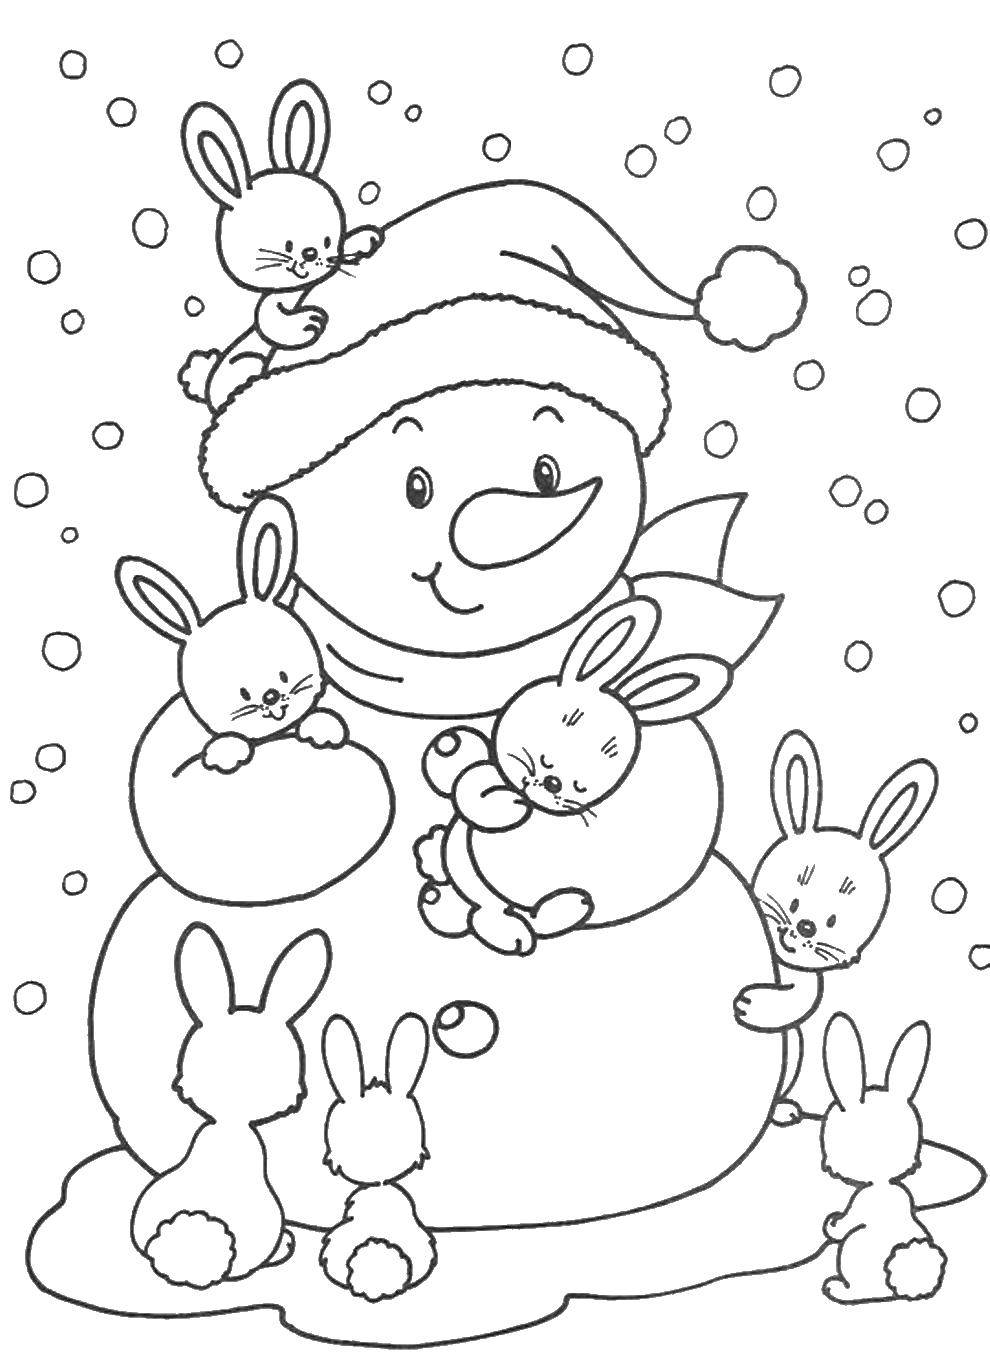 Coloring Snowman. Category coloring winter. Tags:  snowman, winter, new year.